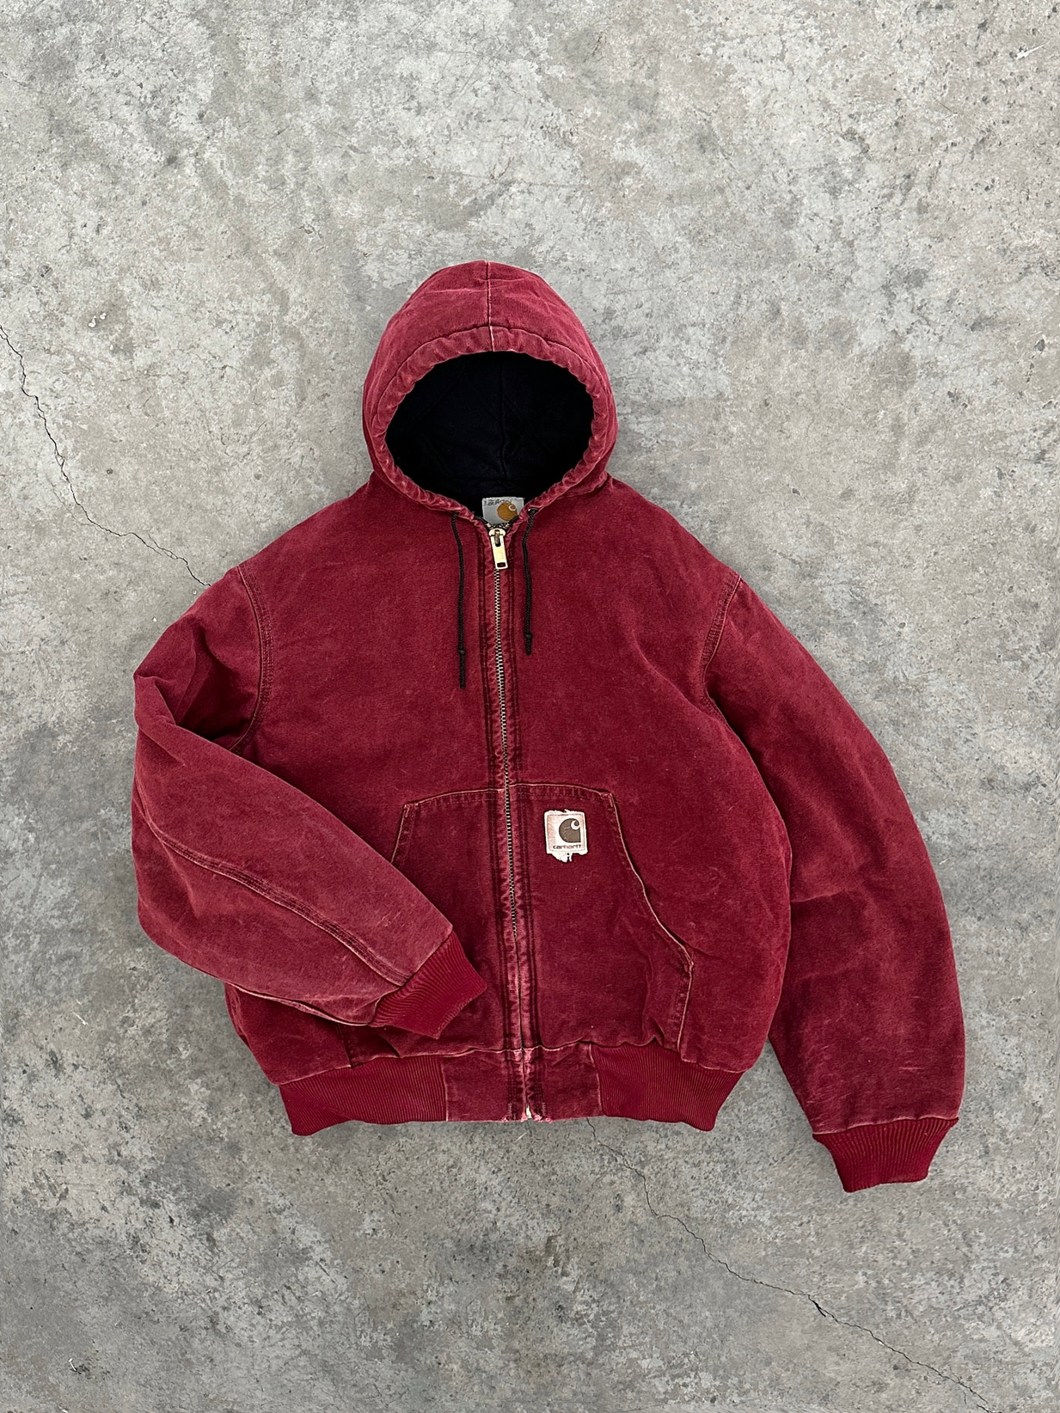 FADED WINE RED HOODED CARHARTT JACKET - 1990S